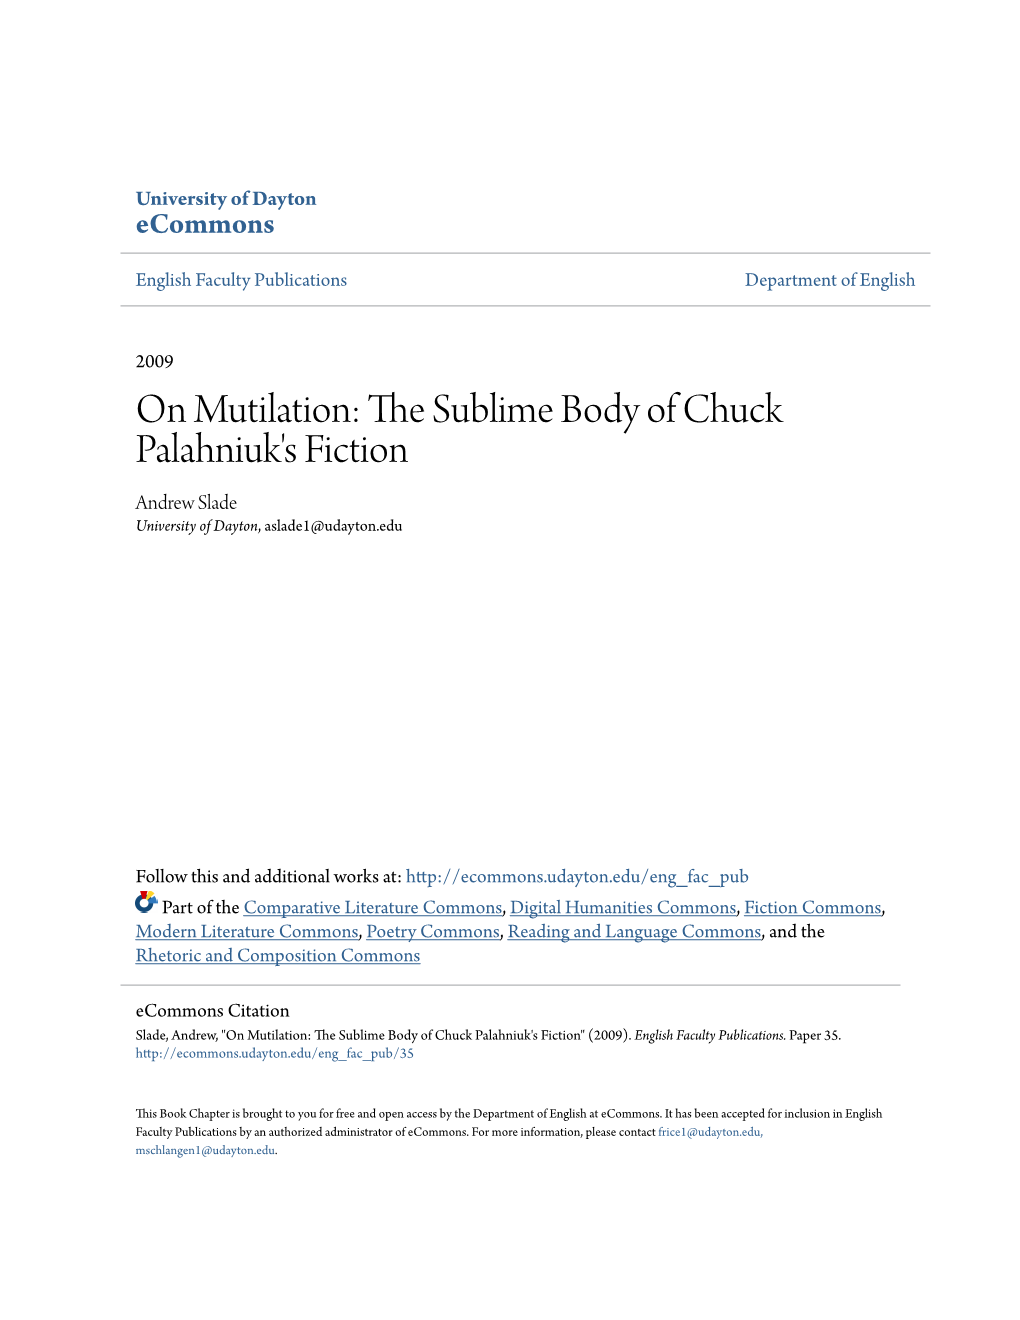 On Mutilation: the Sublime Body of Chuck Palahniuk's Fiction